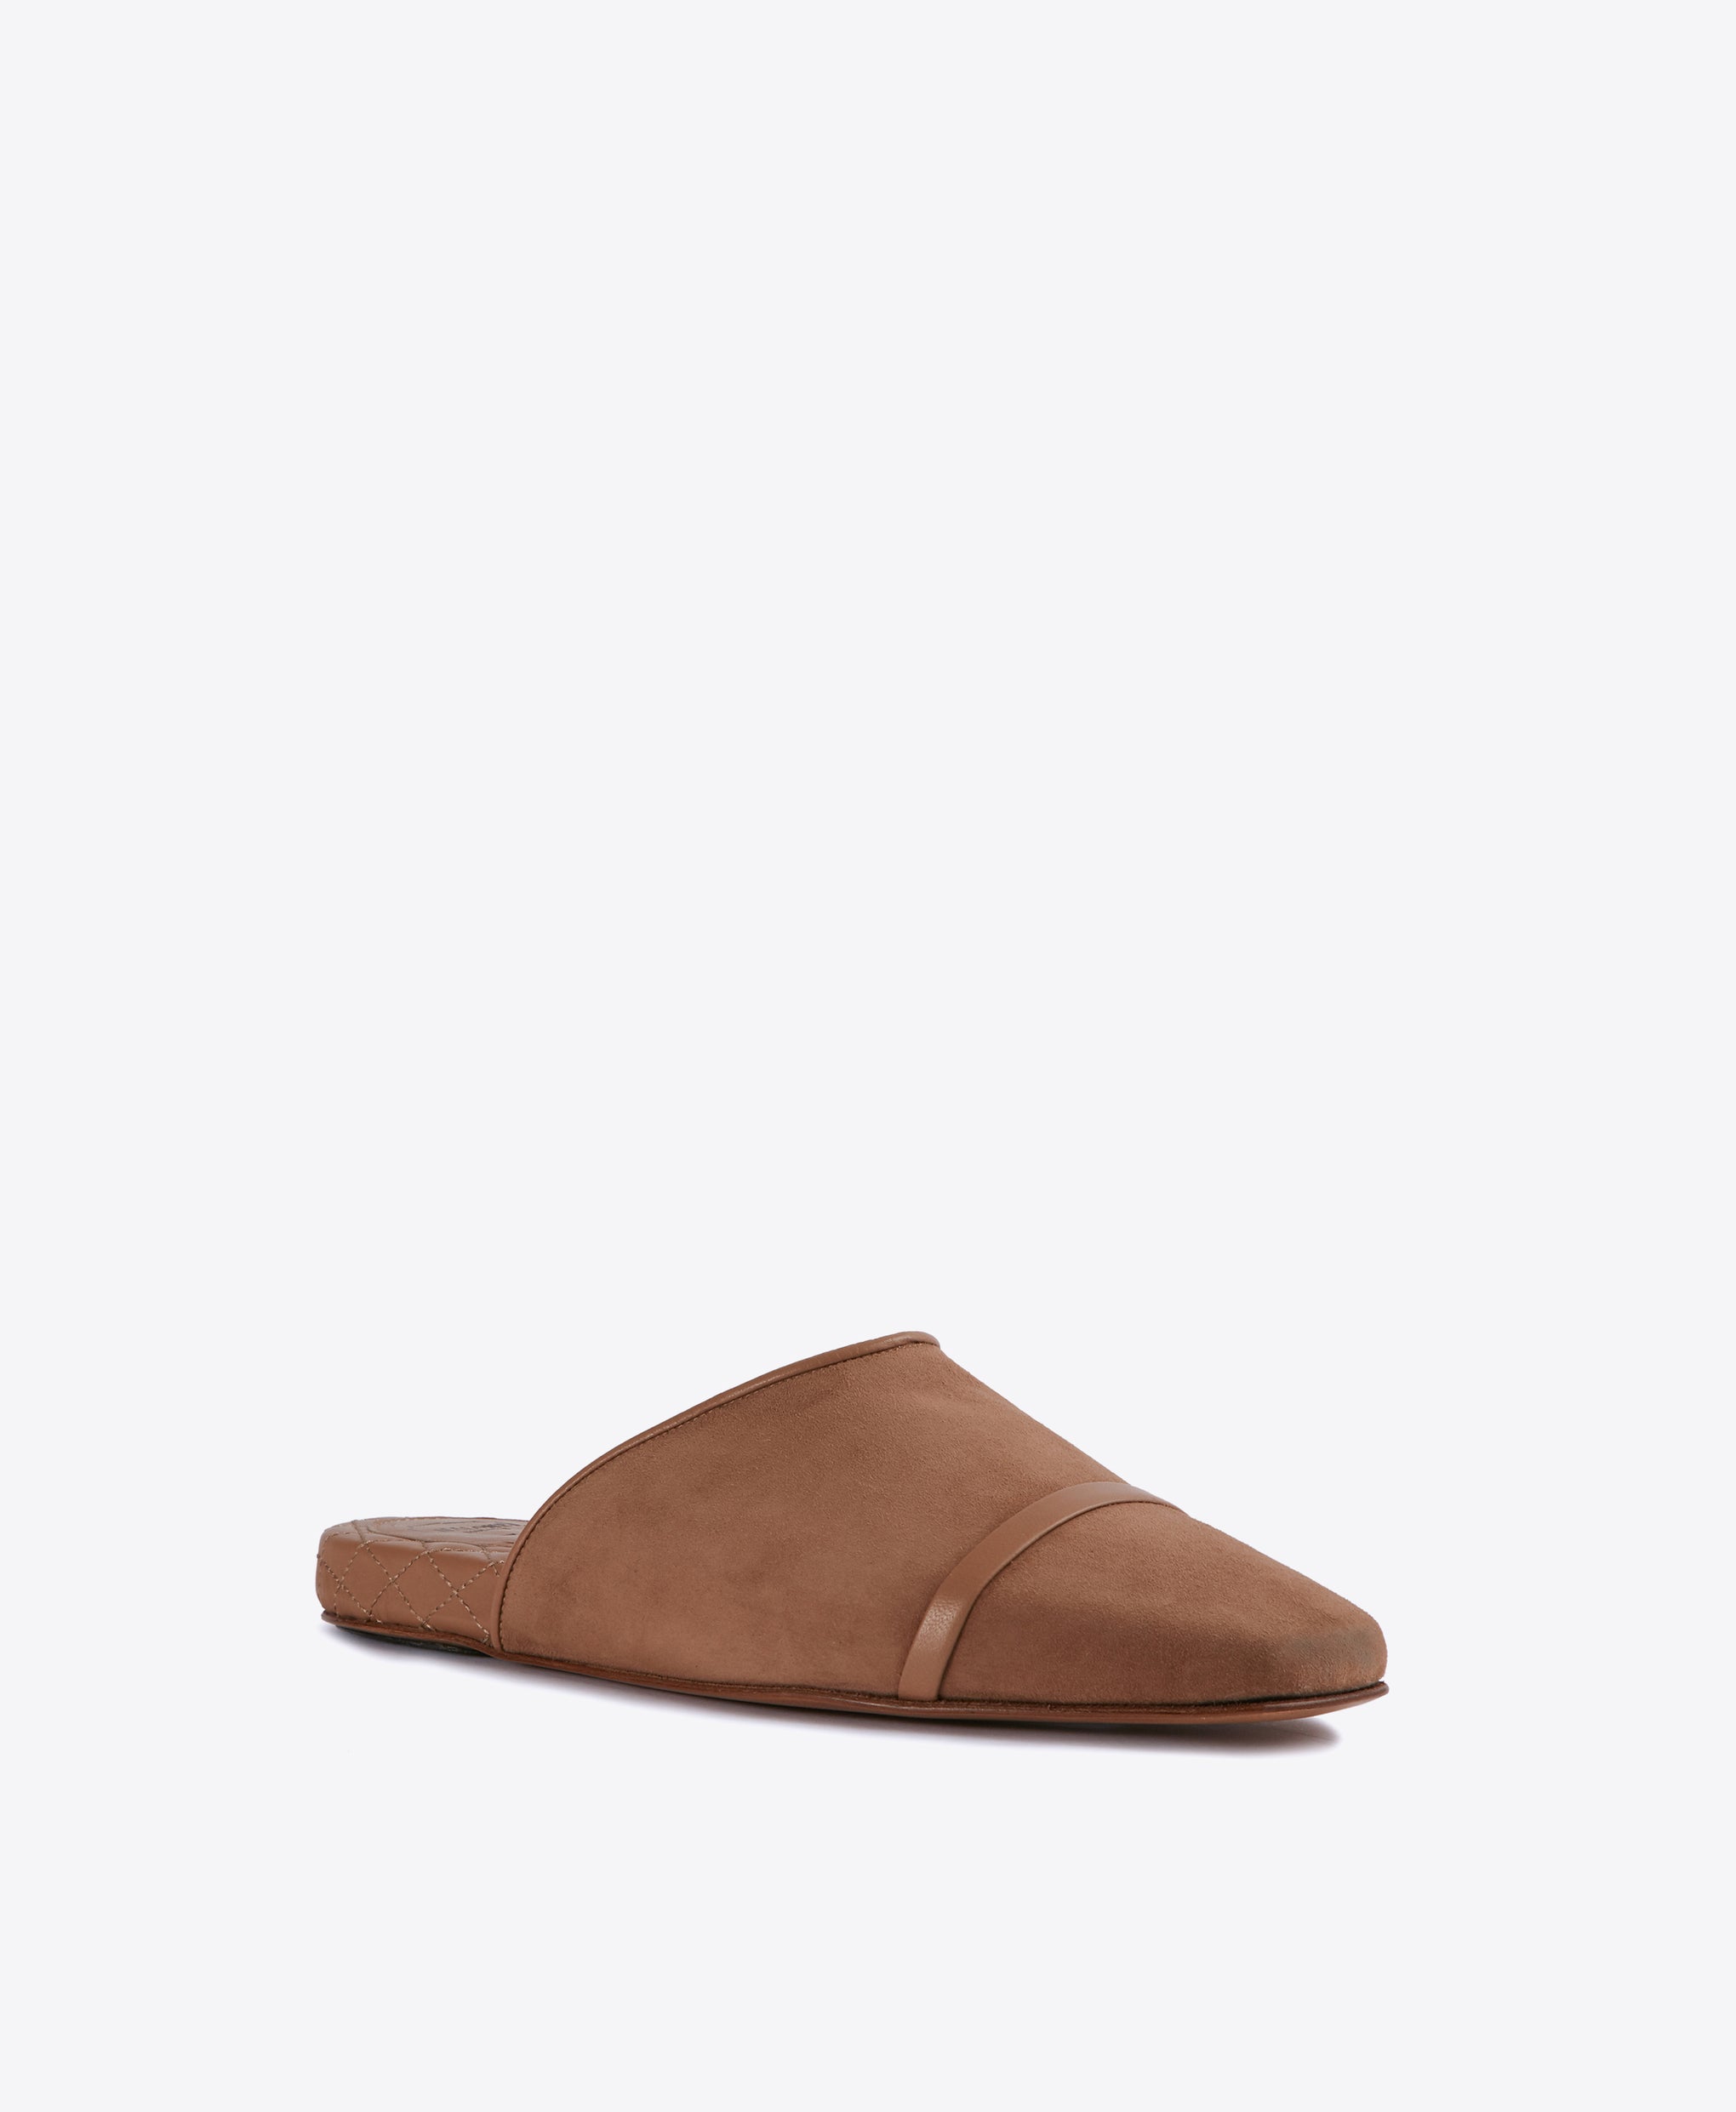 Men's Brown Suede Slip On Shoes Malone Souliers